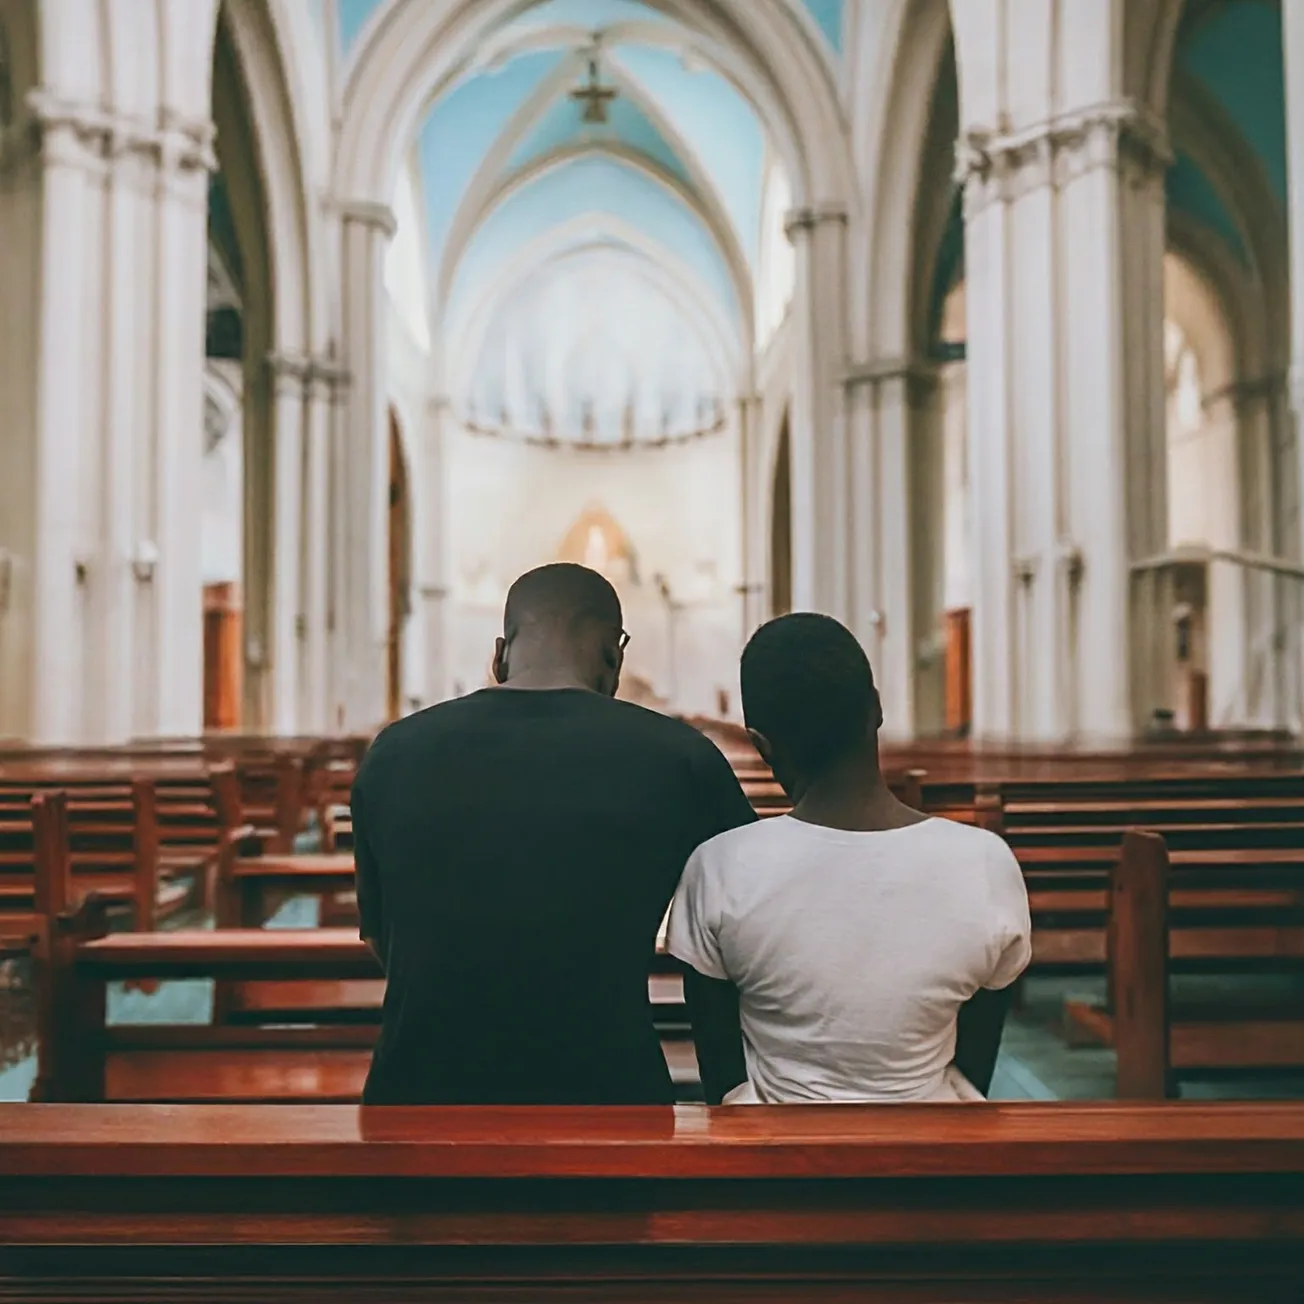 On Diddy and Keke: the Catholic Church and domestic violence